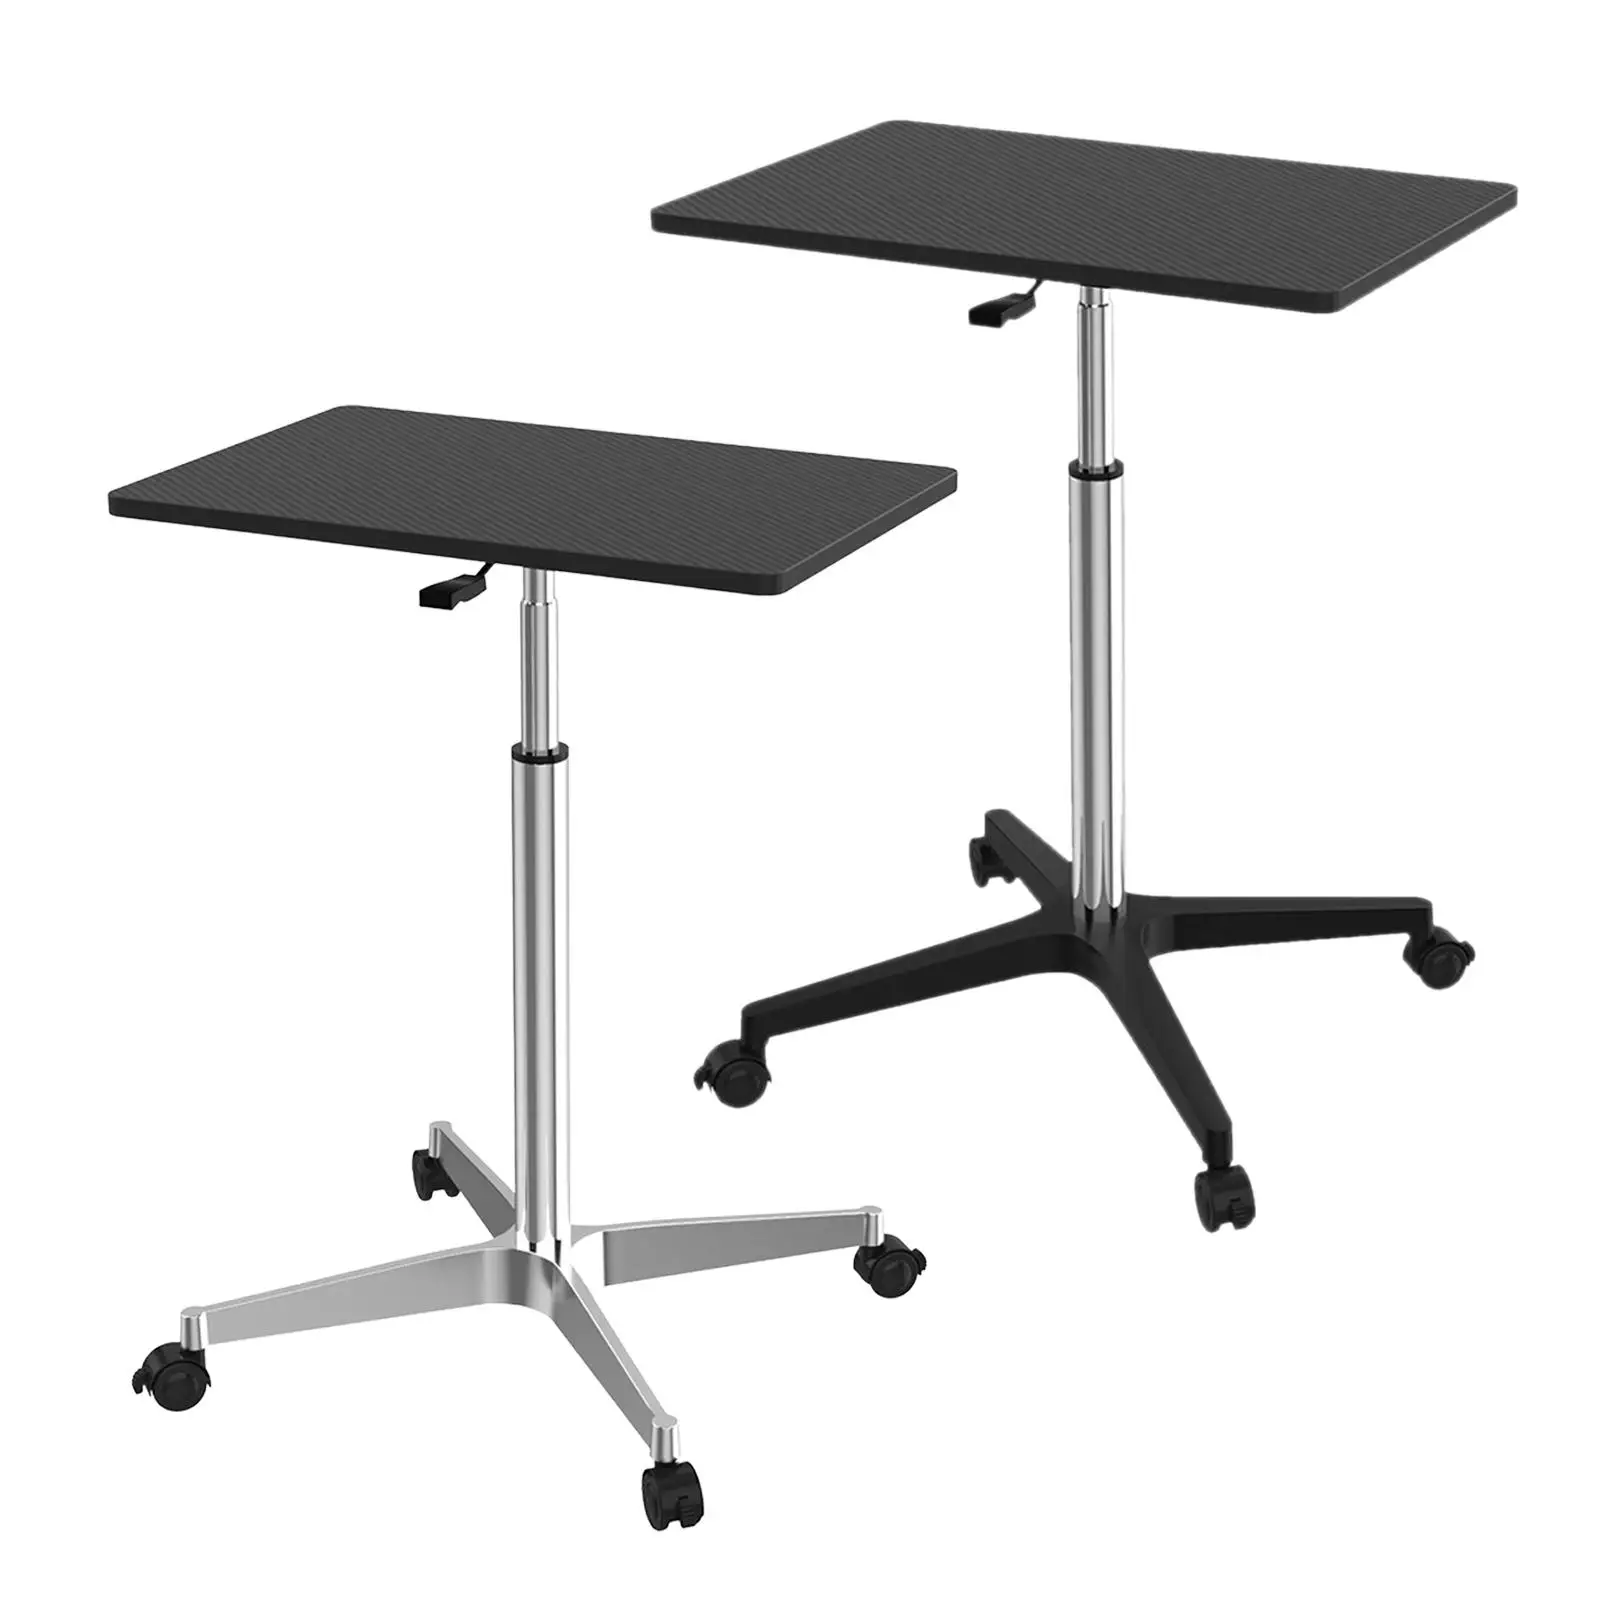 Height Adjustable Mobile Laptop Standing Desk Workstation for Offices Classrooms and Teachers Lightweight Work Table Black Color